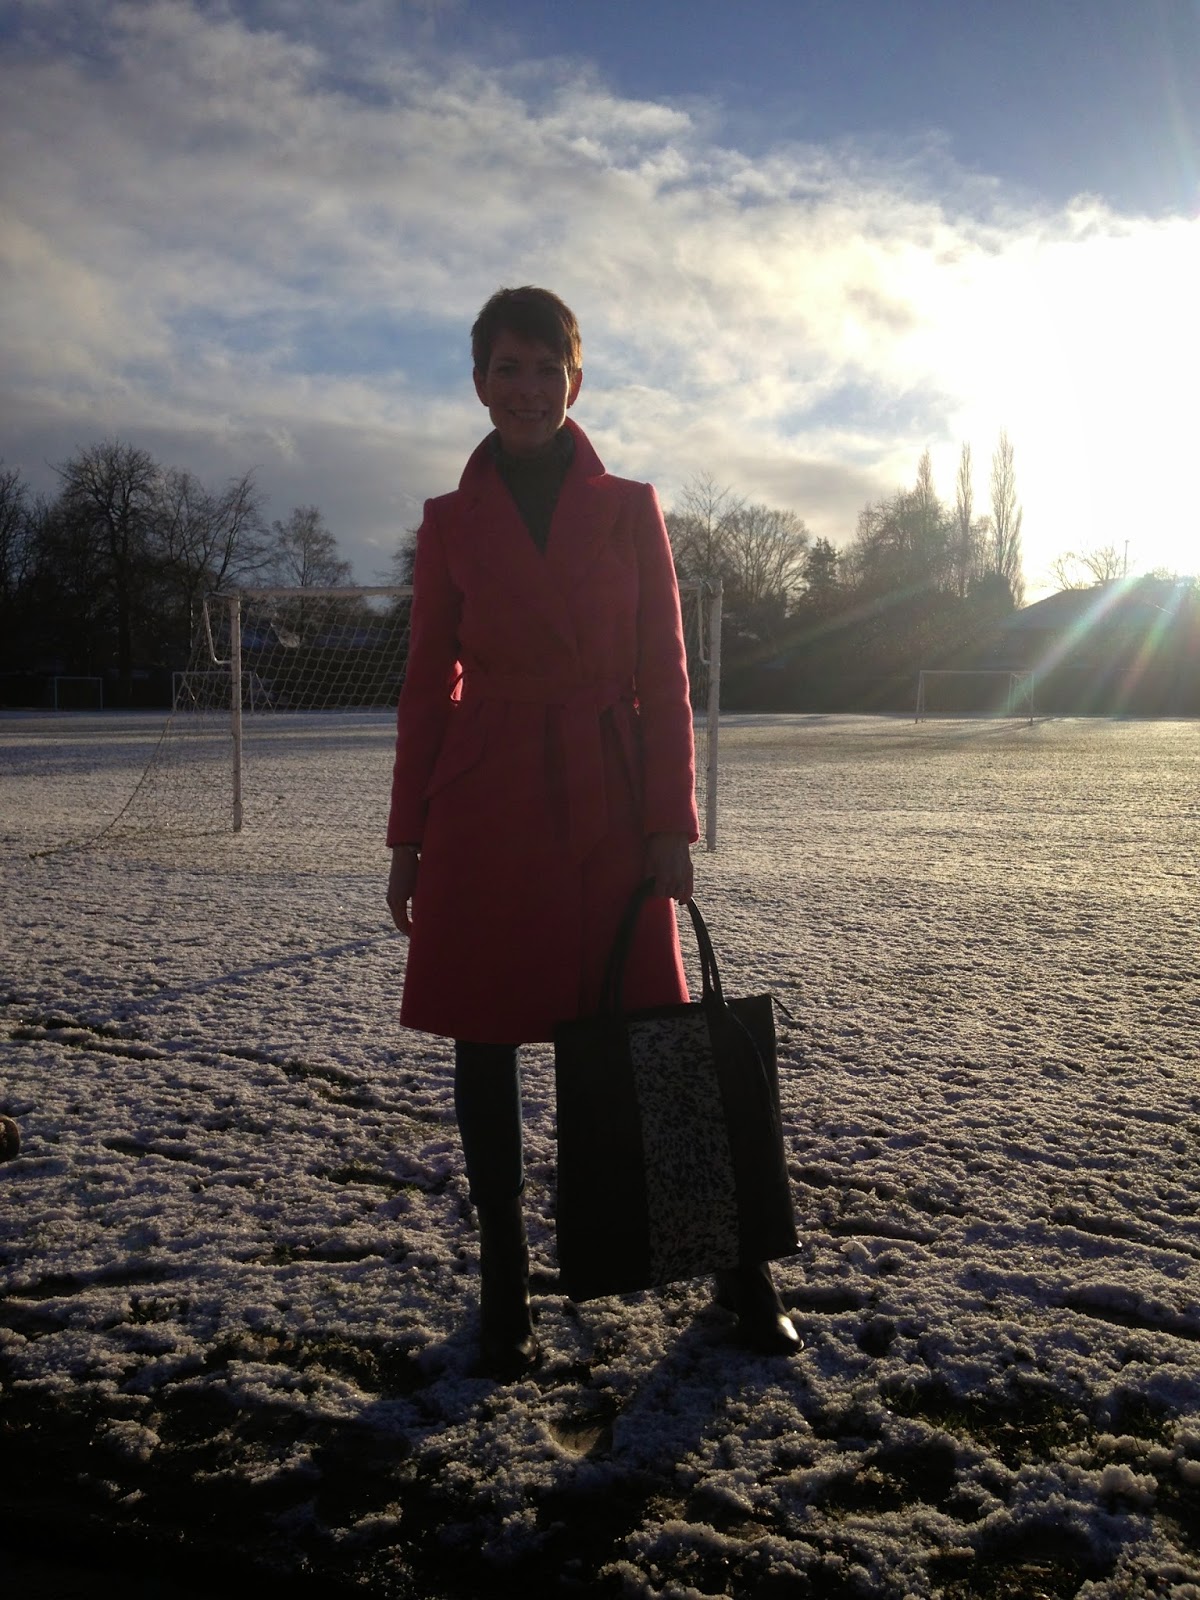 Boden and animal print in the snow plus the tale of Mr SG’s disappearing wardrobe….he’s only got himself to blame.